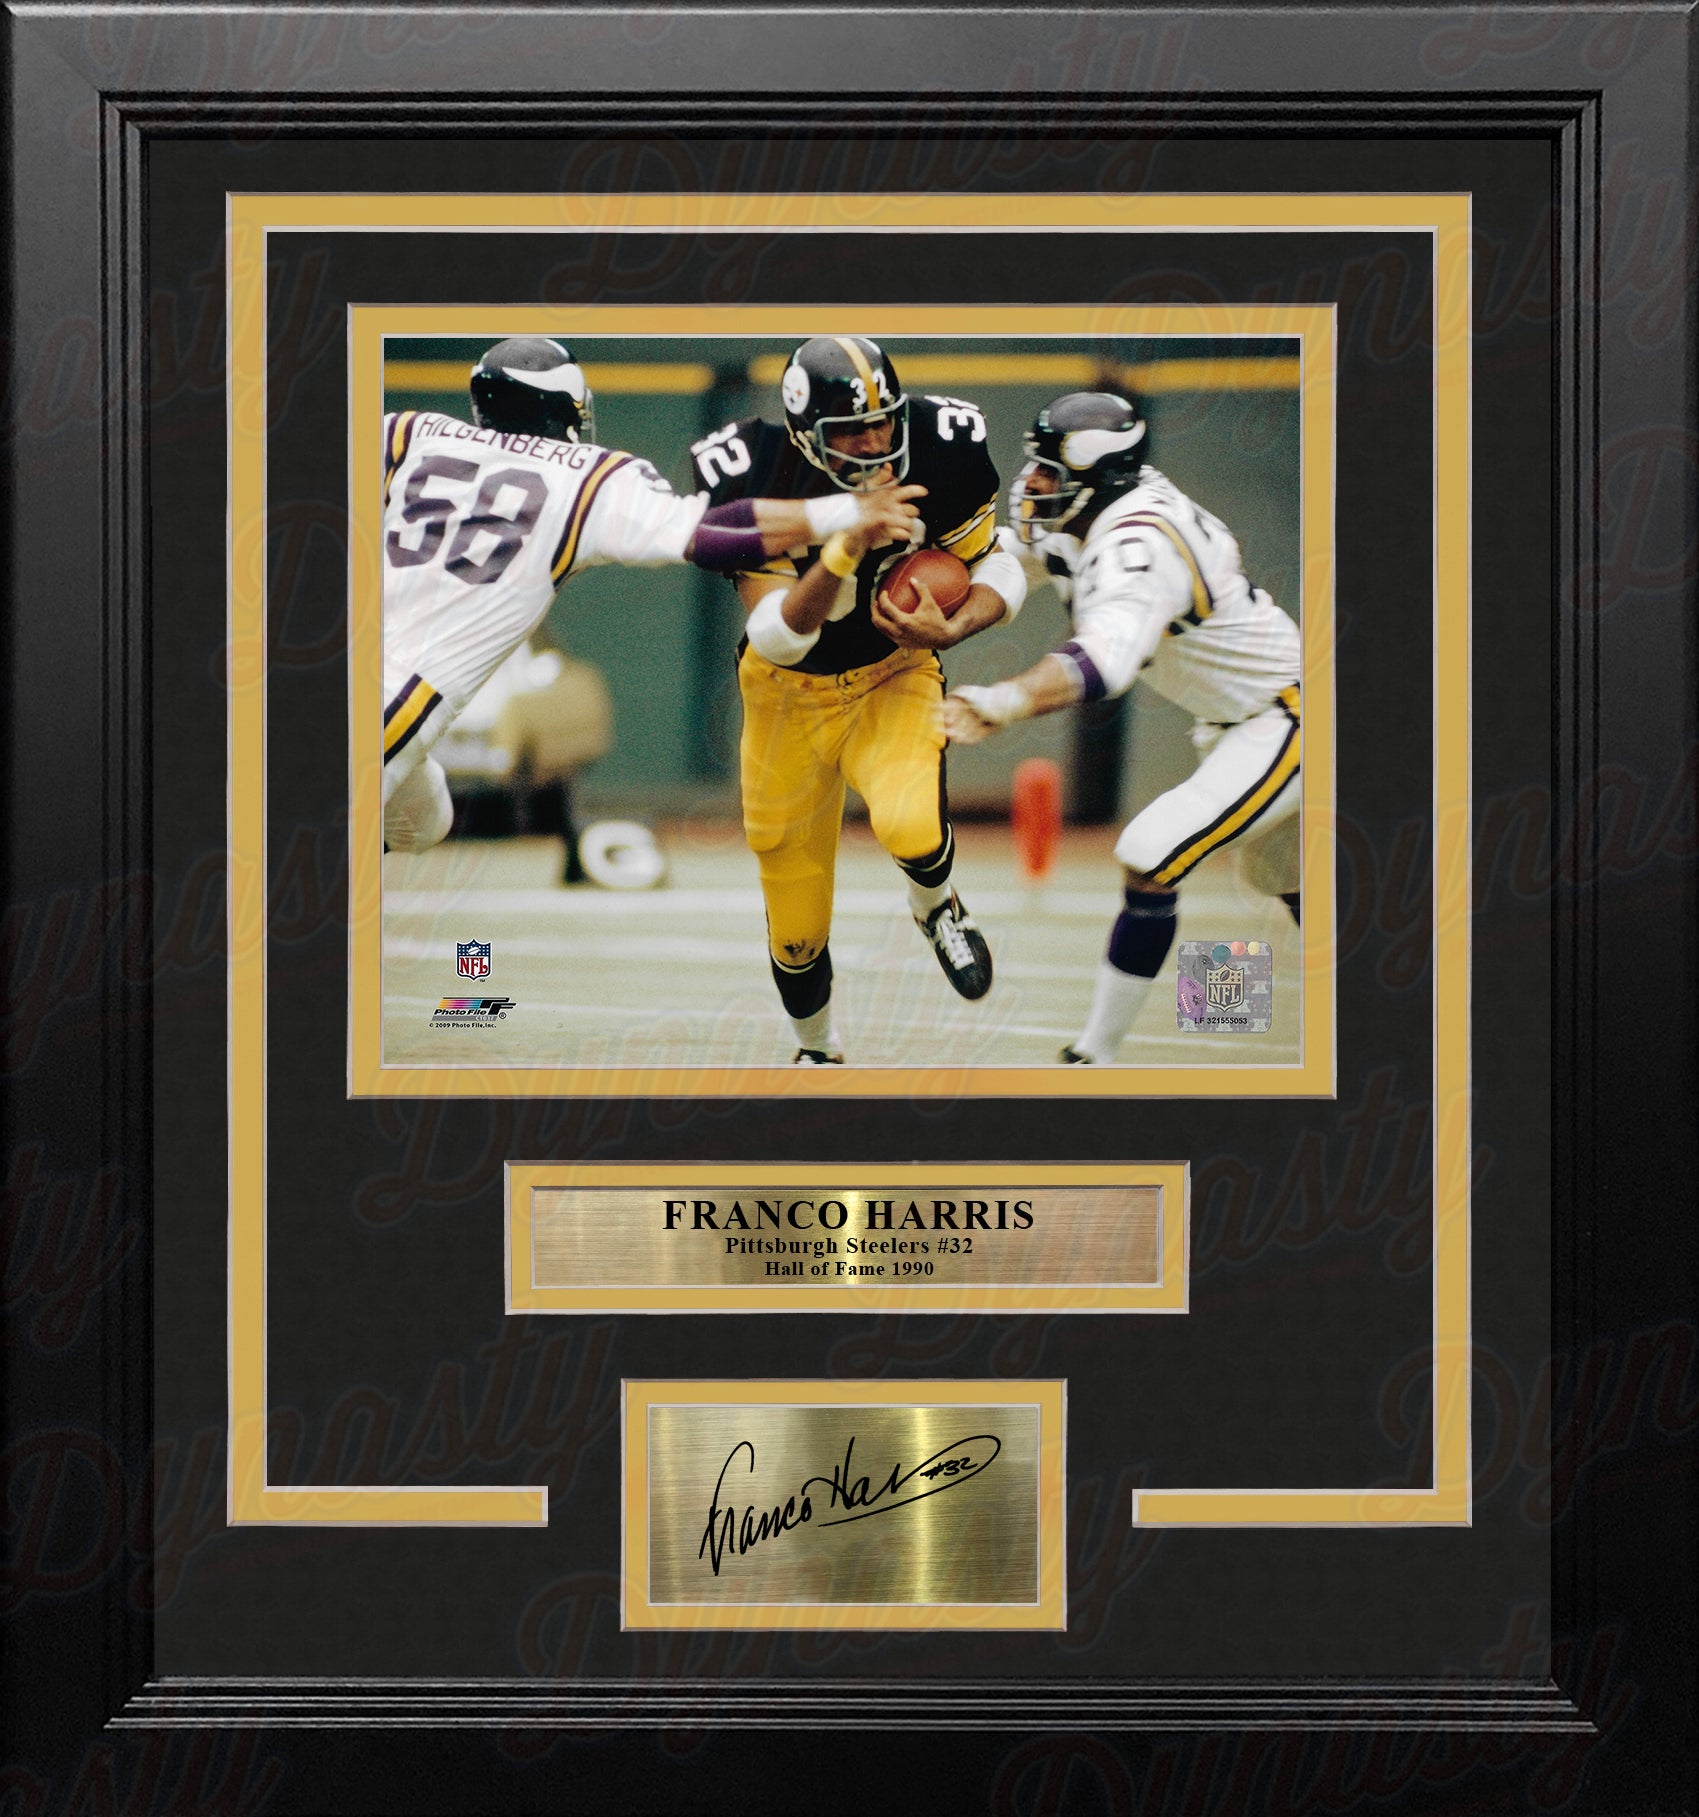 Franco Harris v. Vikings Pittsburgh Steelers 8' x 10' Framed Photo with  Engraved Autograph - Dynasty Sports & Framing